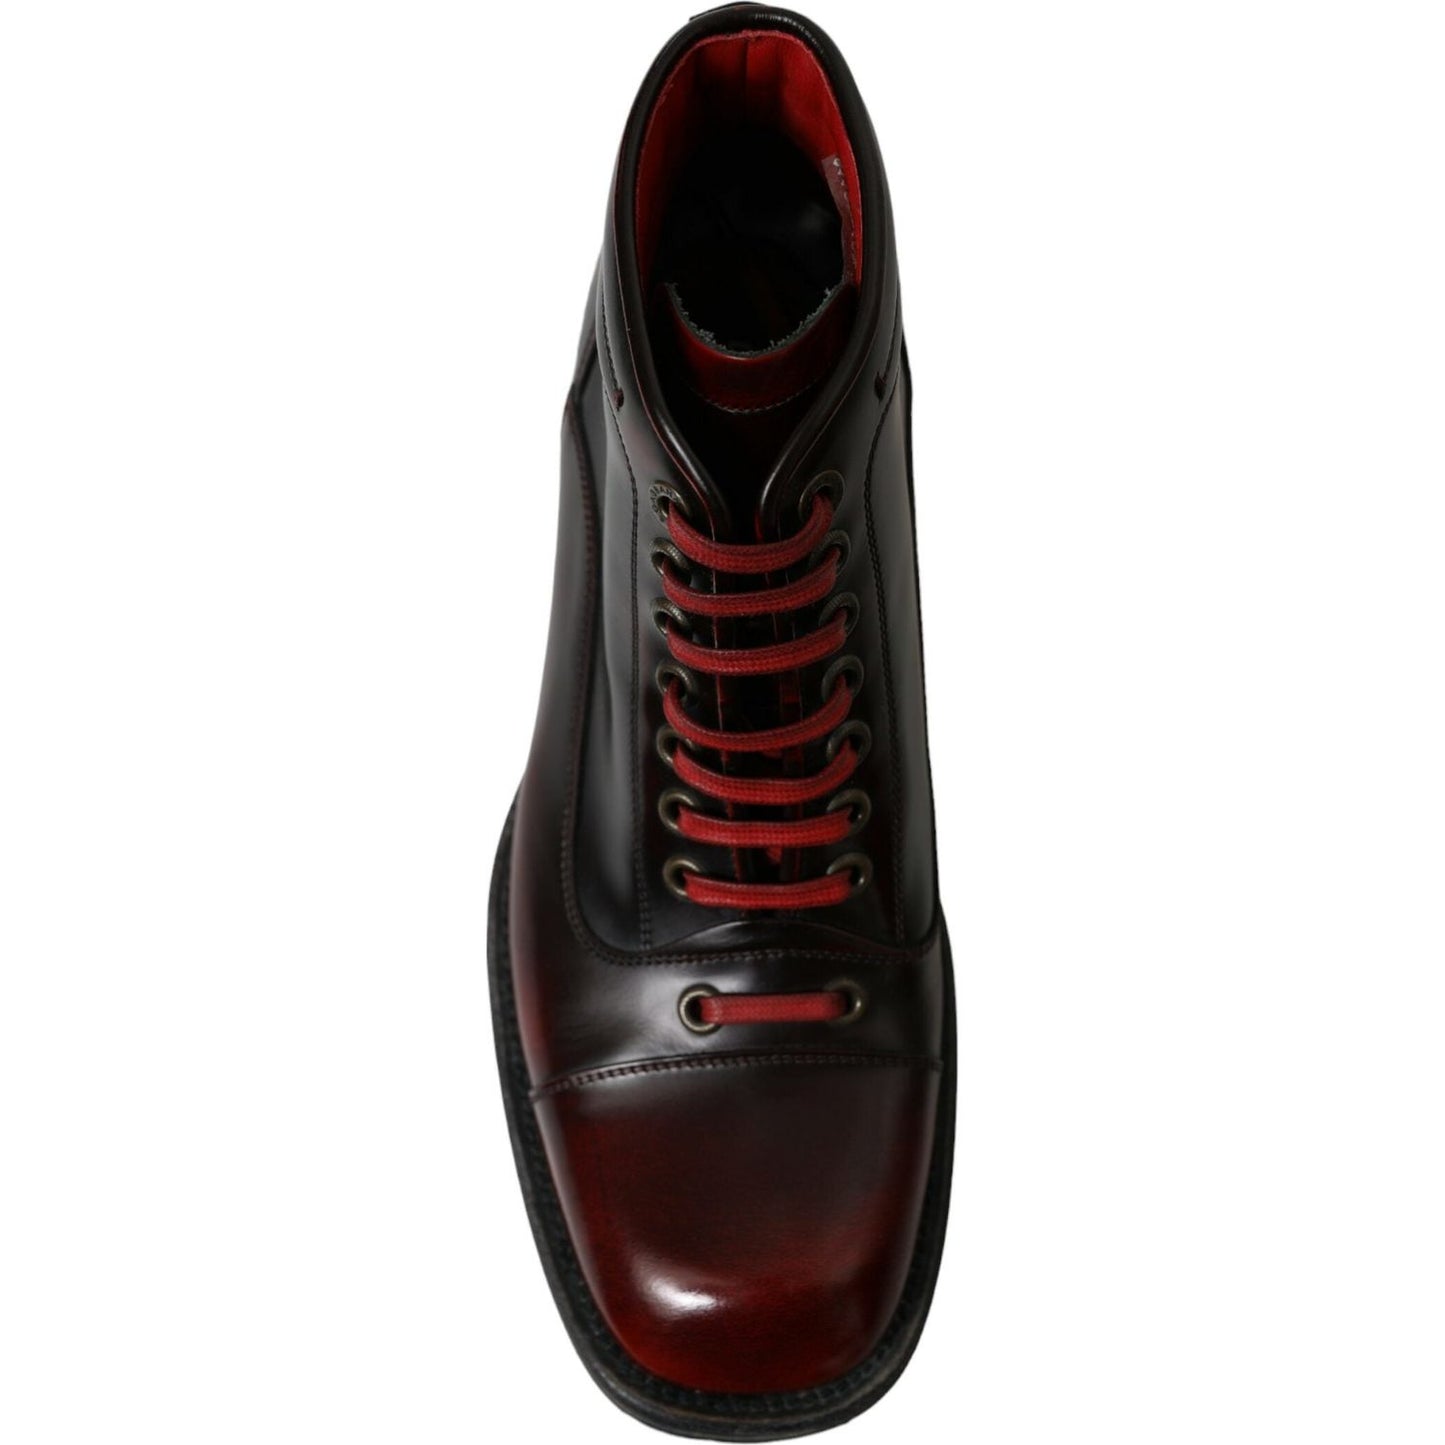 Dolce & Gabbana Dapper Dual-Tone Leather Ankle Boots black-red-leather-lace-up-ankle-boots-shoes